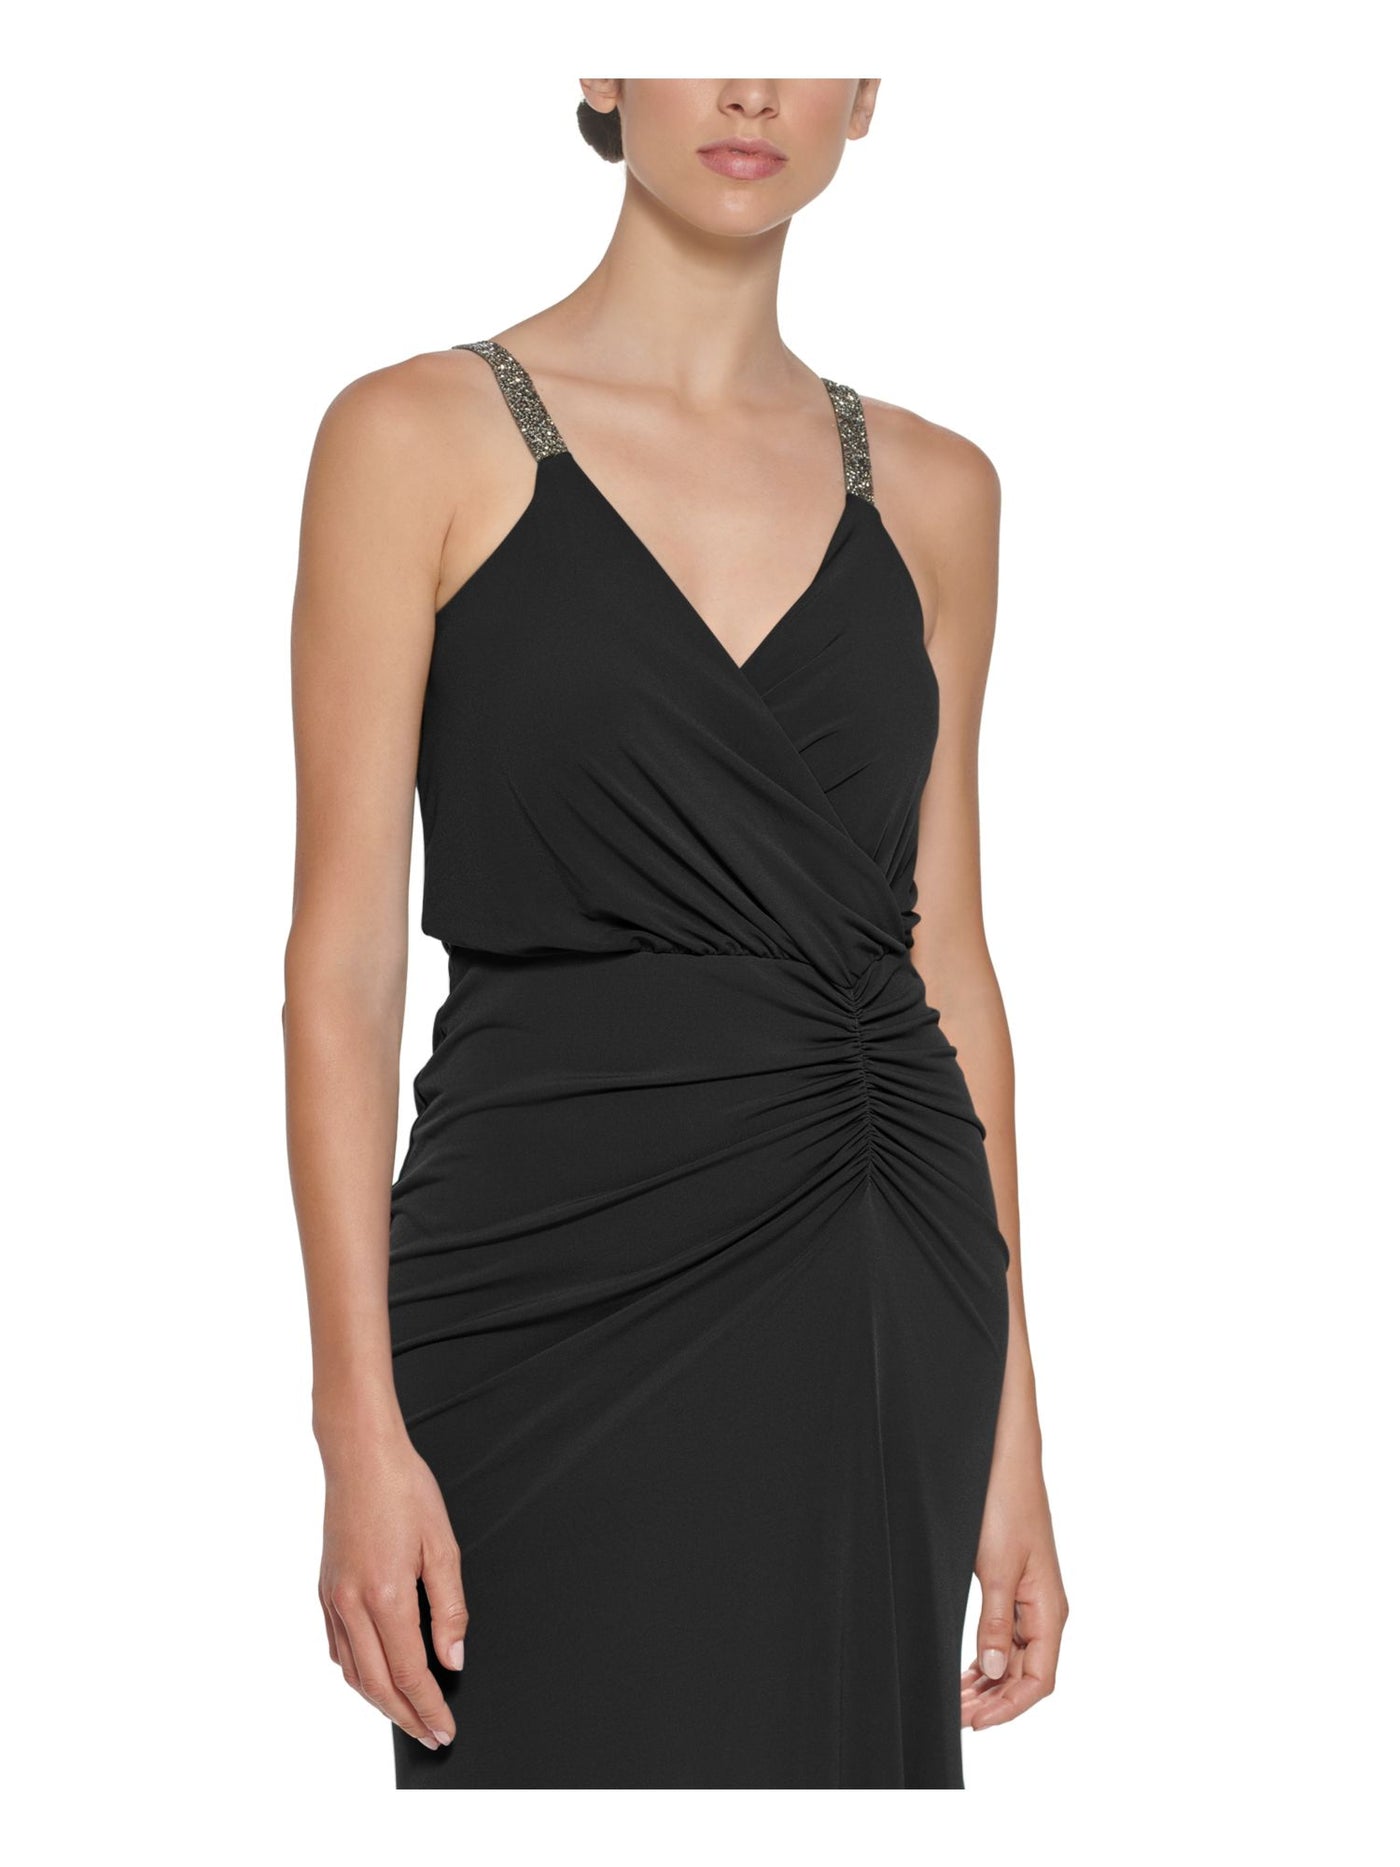 CALVIN KLEIN Womens Black Stretch Ruched Zippered Embellished Straps Jersey-knit Sleeveless Surplice Neckline Full-Length Formal Gown Dress 2